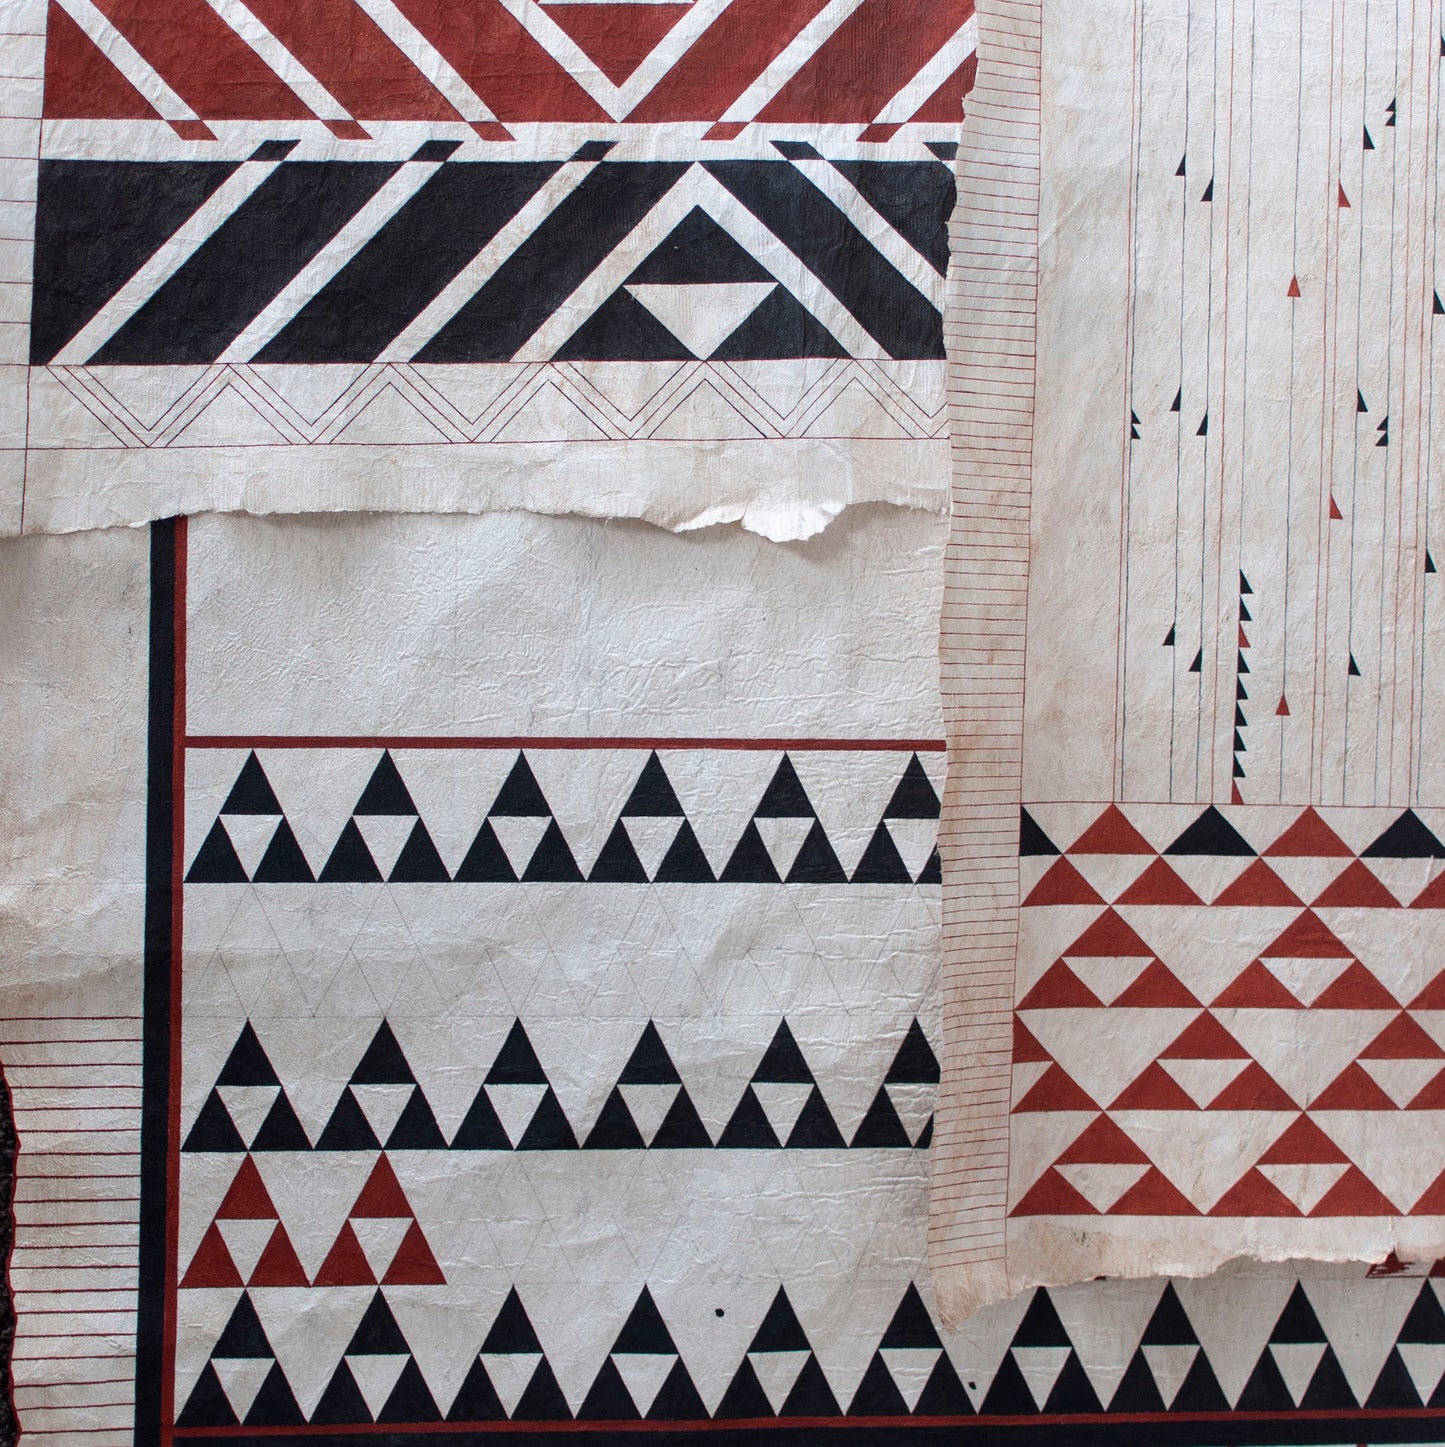 Barkcloth, Textile and Fibre Arts, hosted by The World Crafts Council, Aotearoa, New Zealand